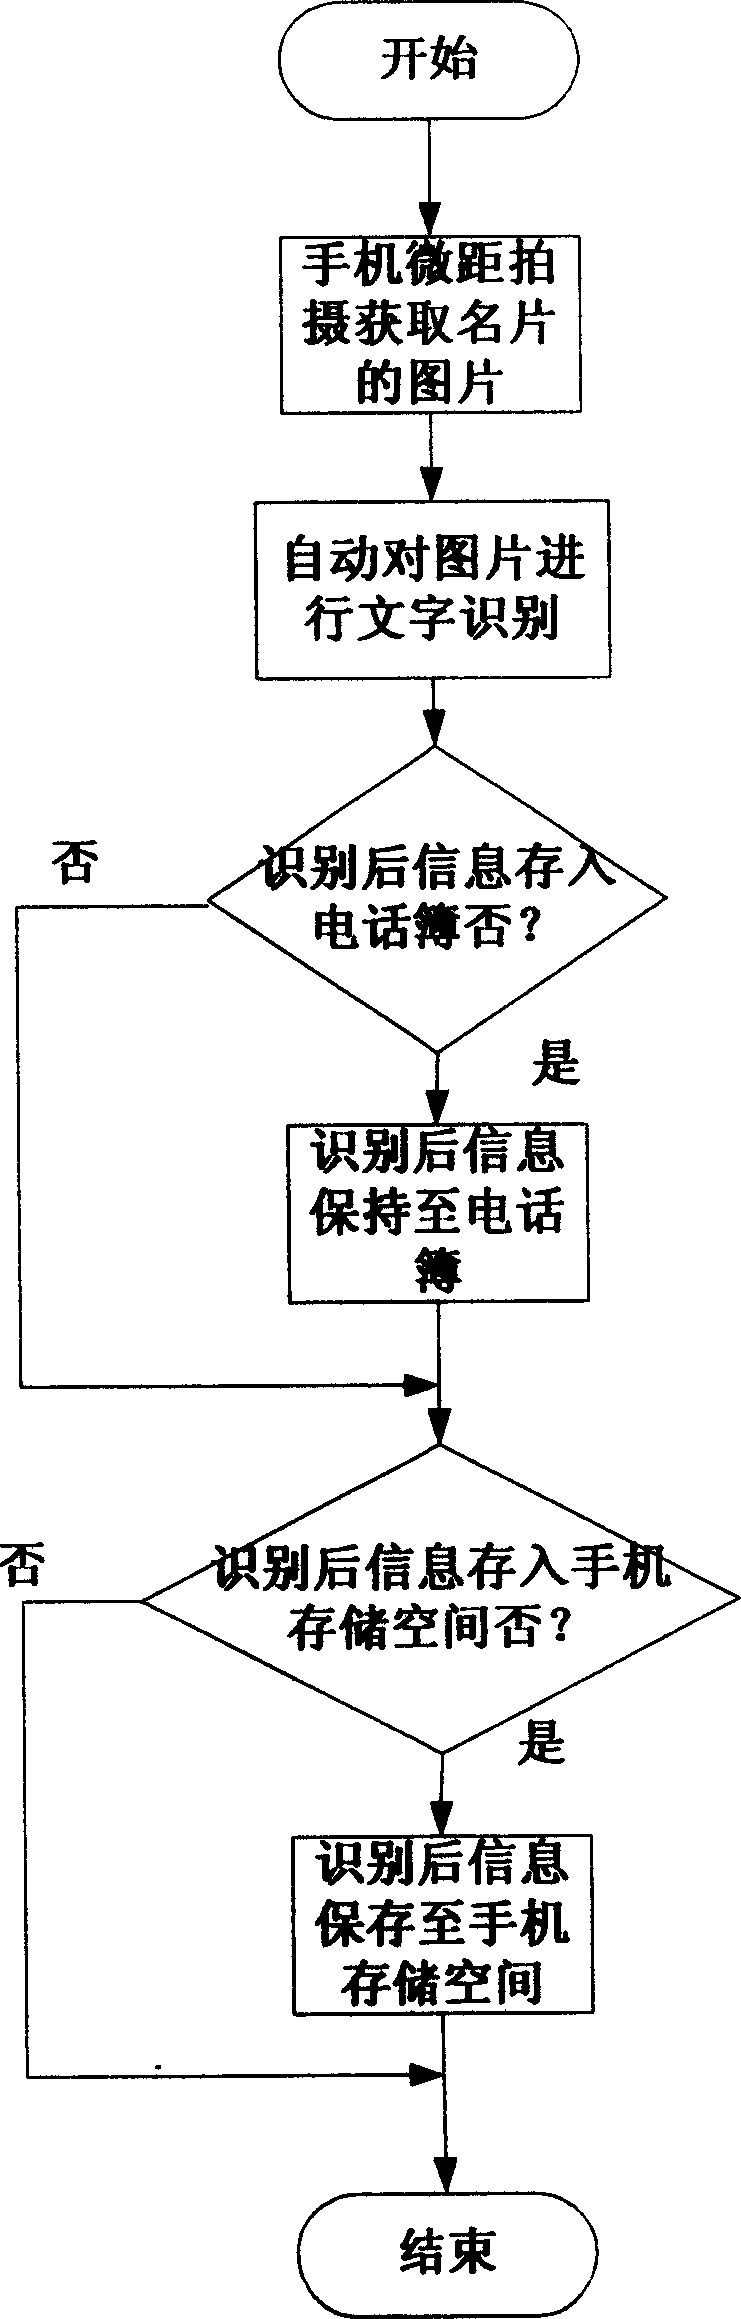 Method for converting namecards into telephone memo or electronic namecards by mobile telephone